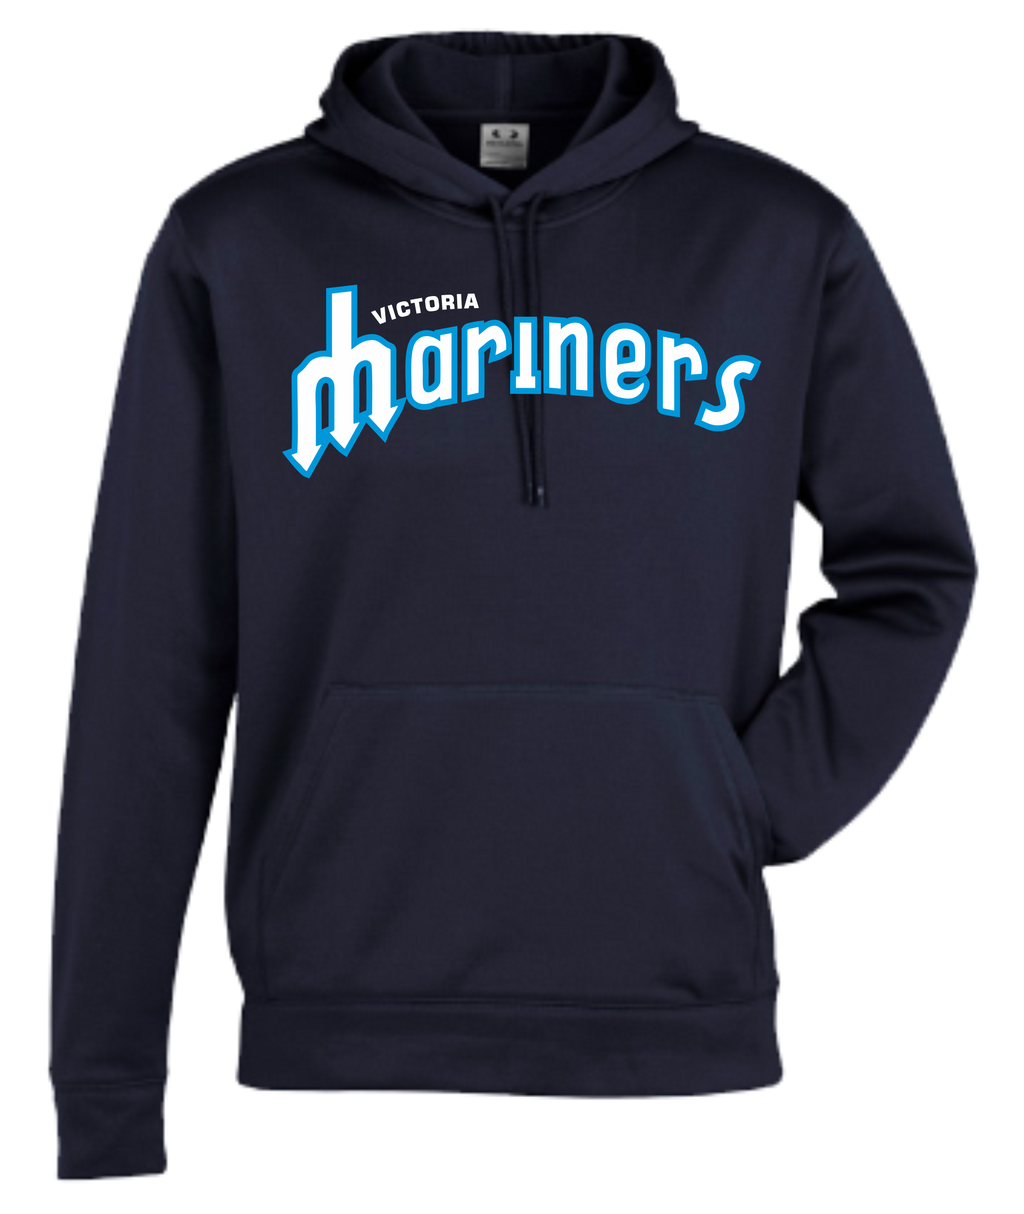 Victoria Mariners Baseball Club Unisex and Youth Pullover DriFit Hoodie